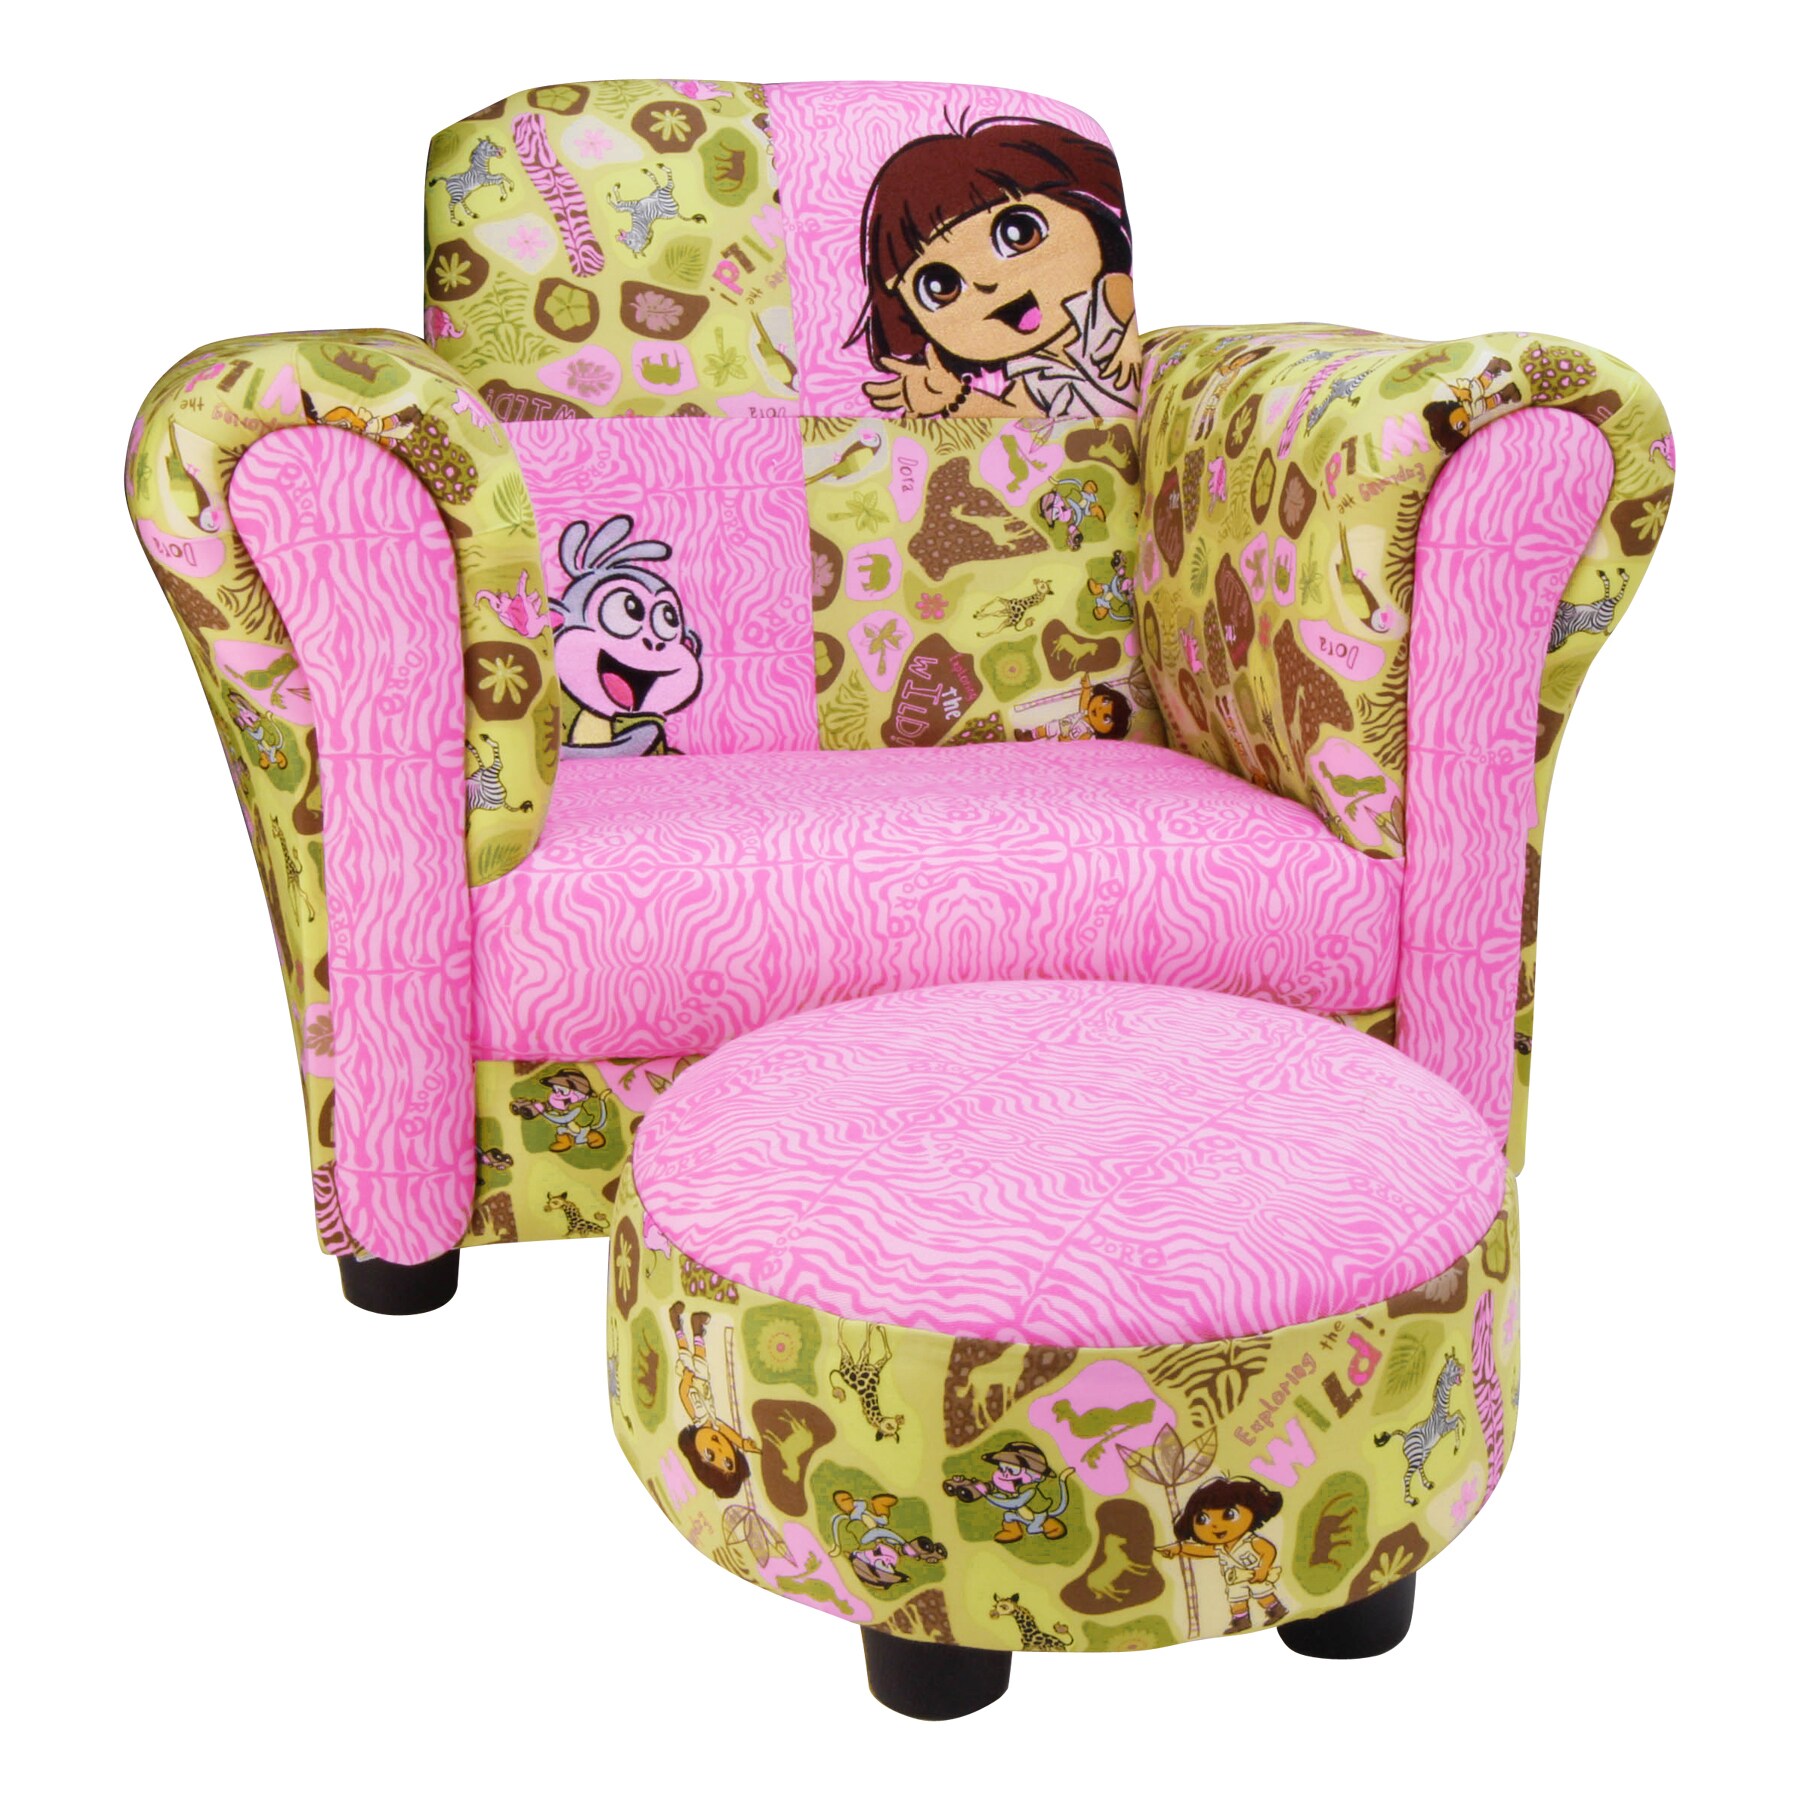 Trend Lab Dora the Explorer Club Chair and Ottoman Set Today $100.00